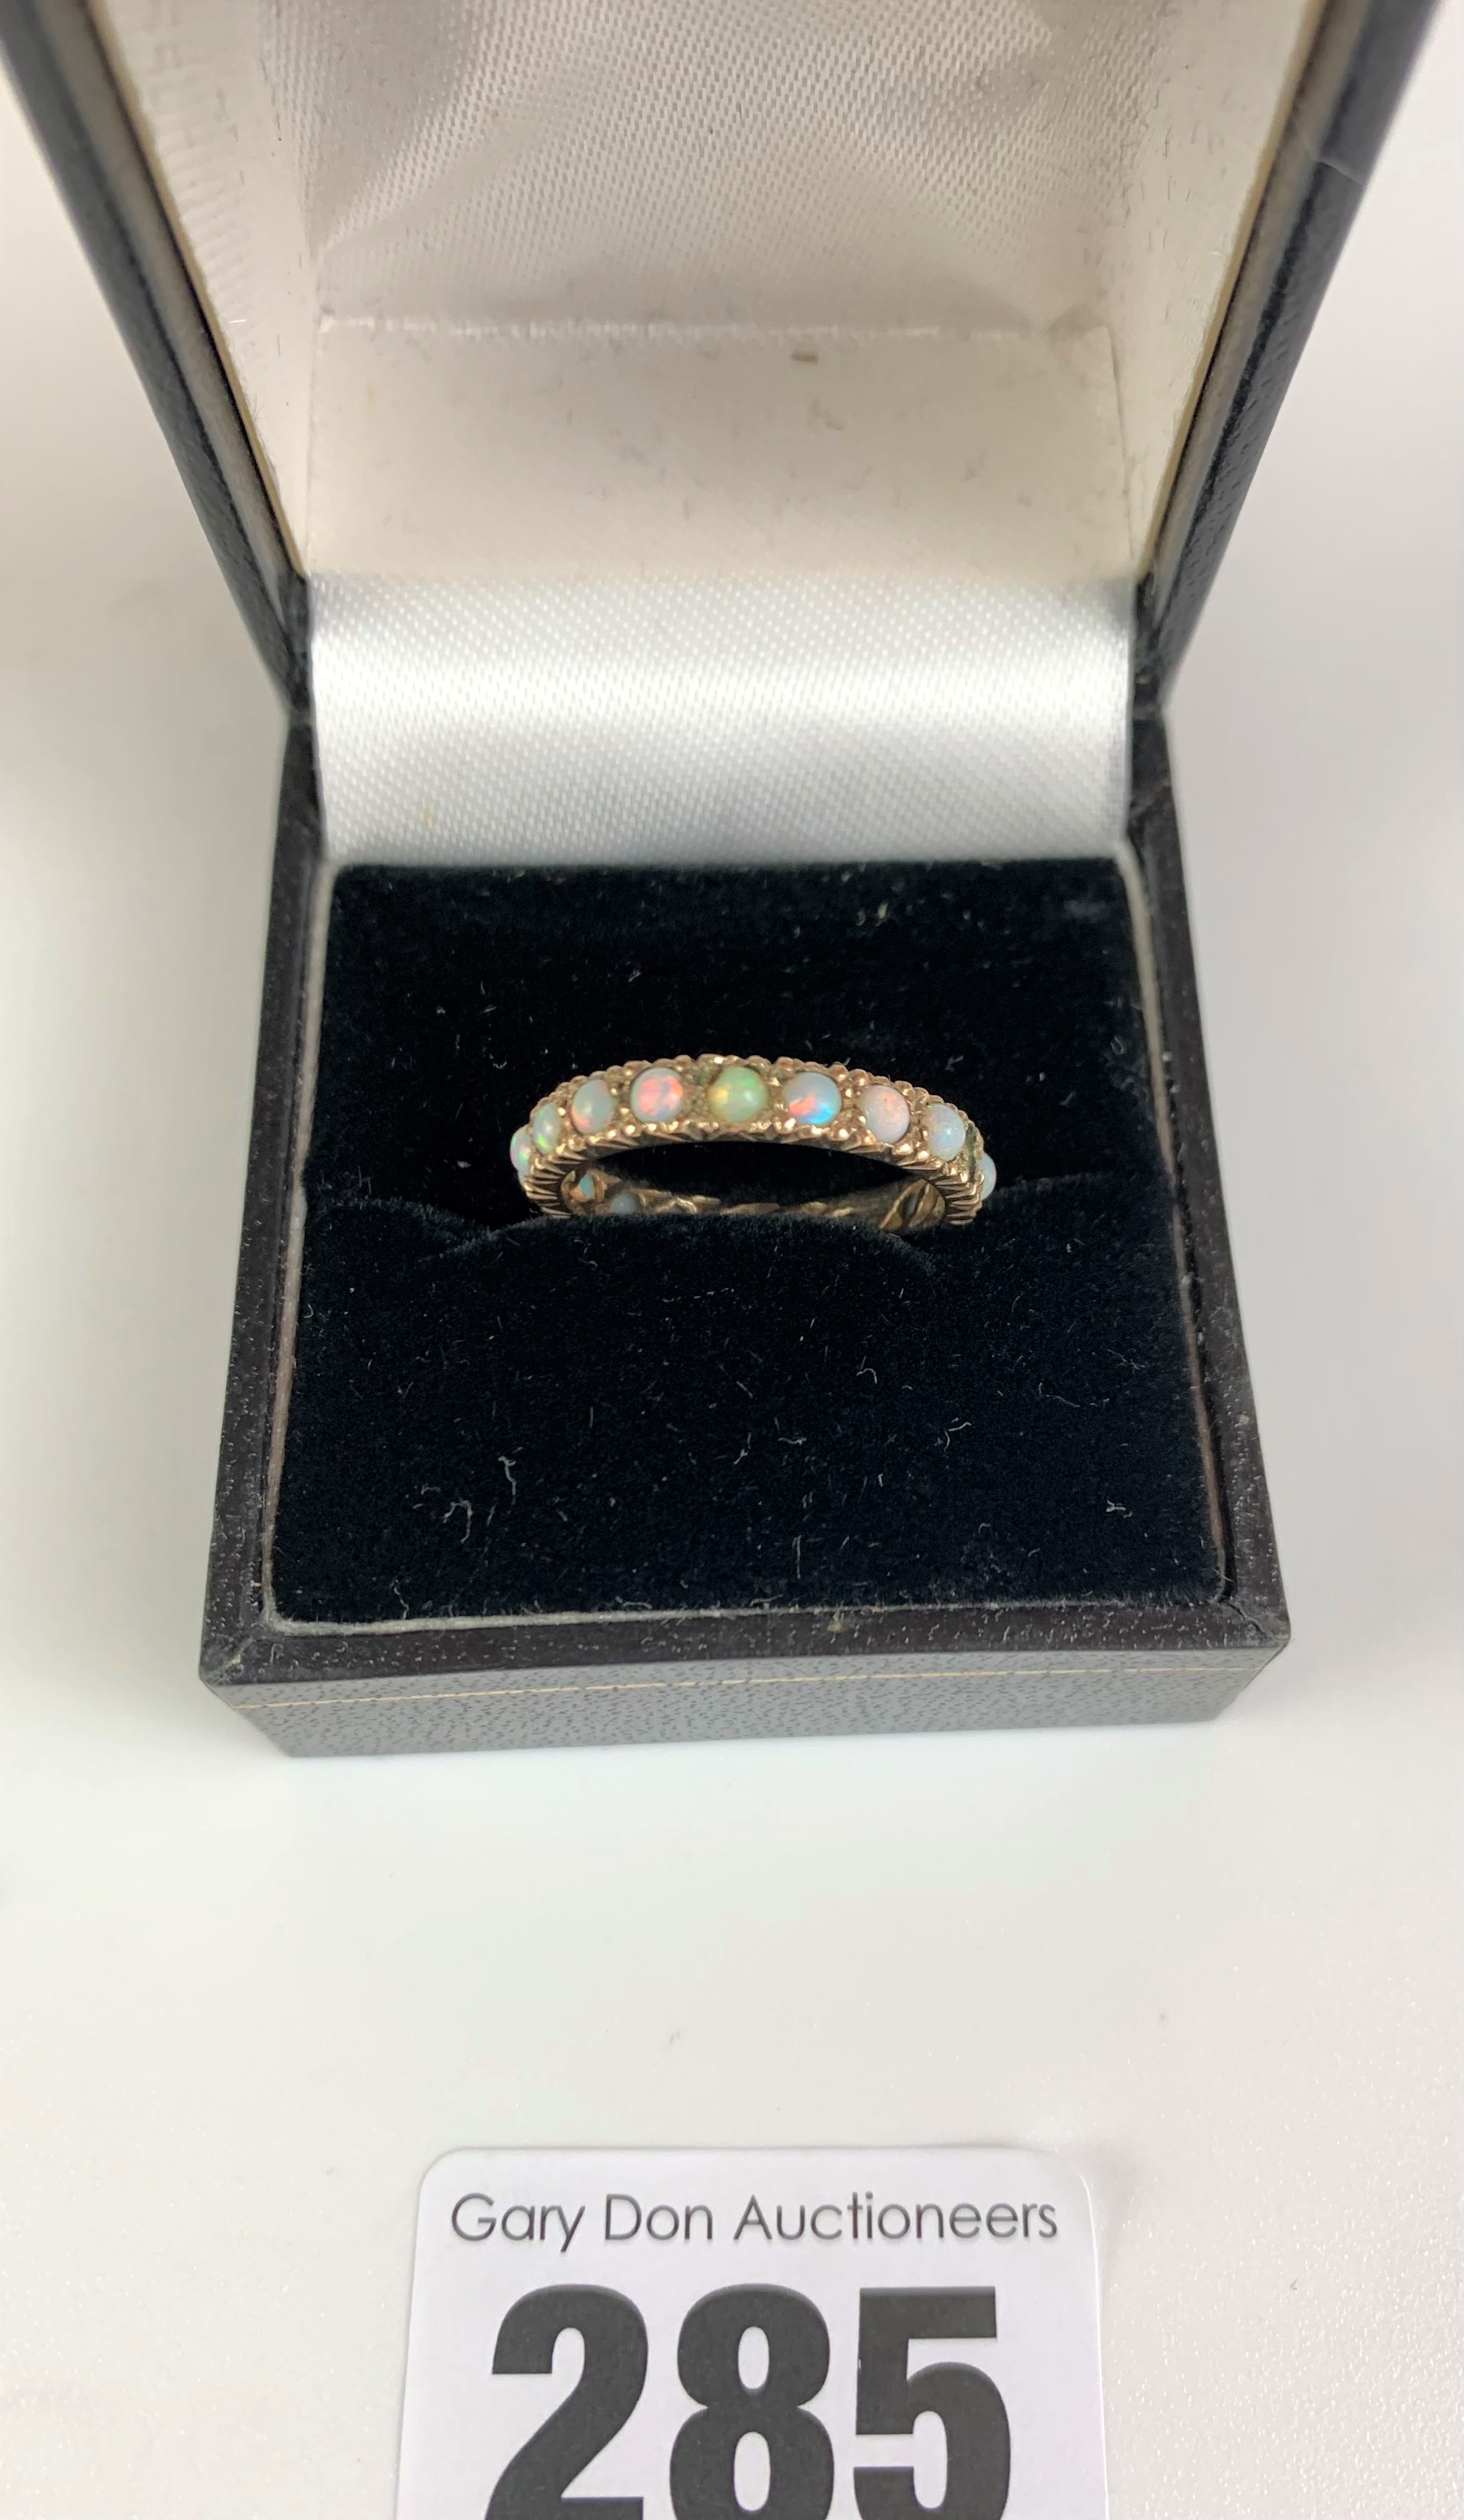 9k gold and opal eternity ring, 1 stone missing, size N, w: 2.1 gms - Image 2 of 5